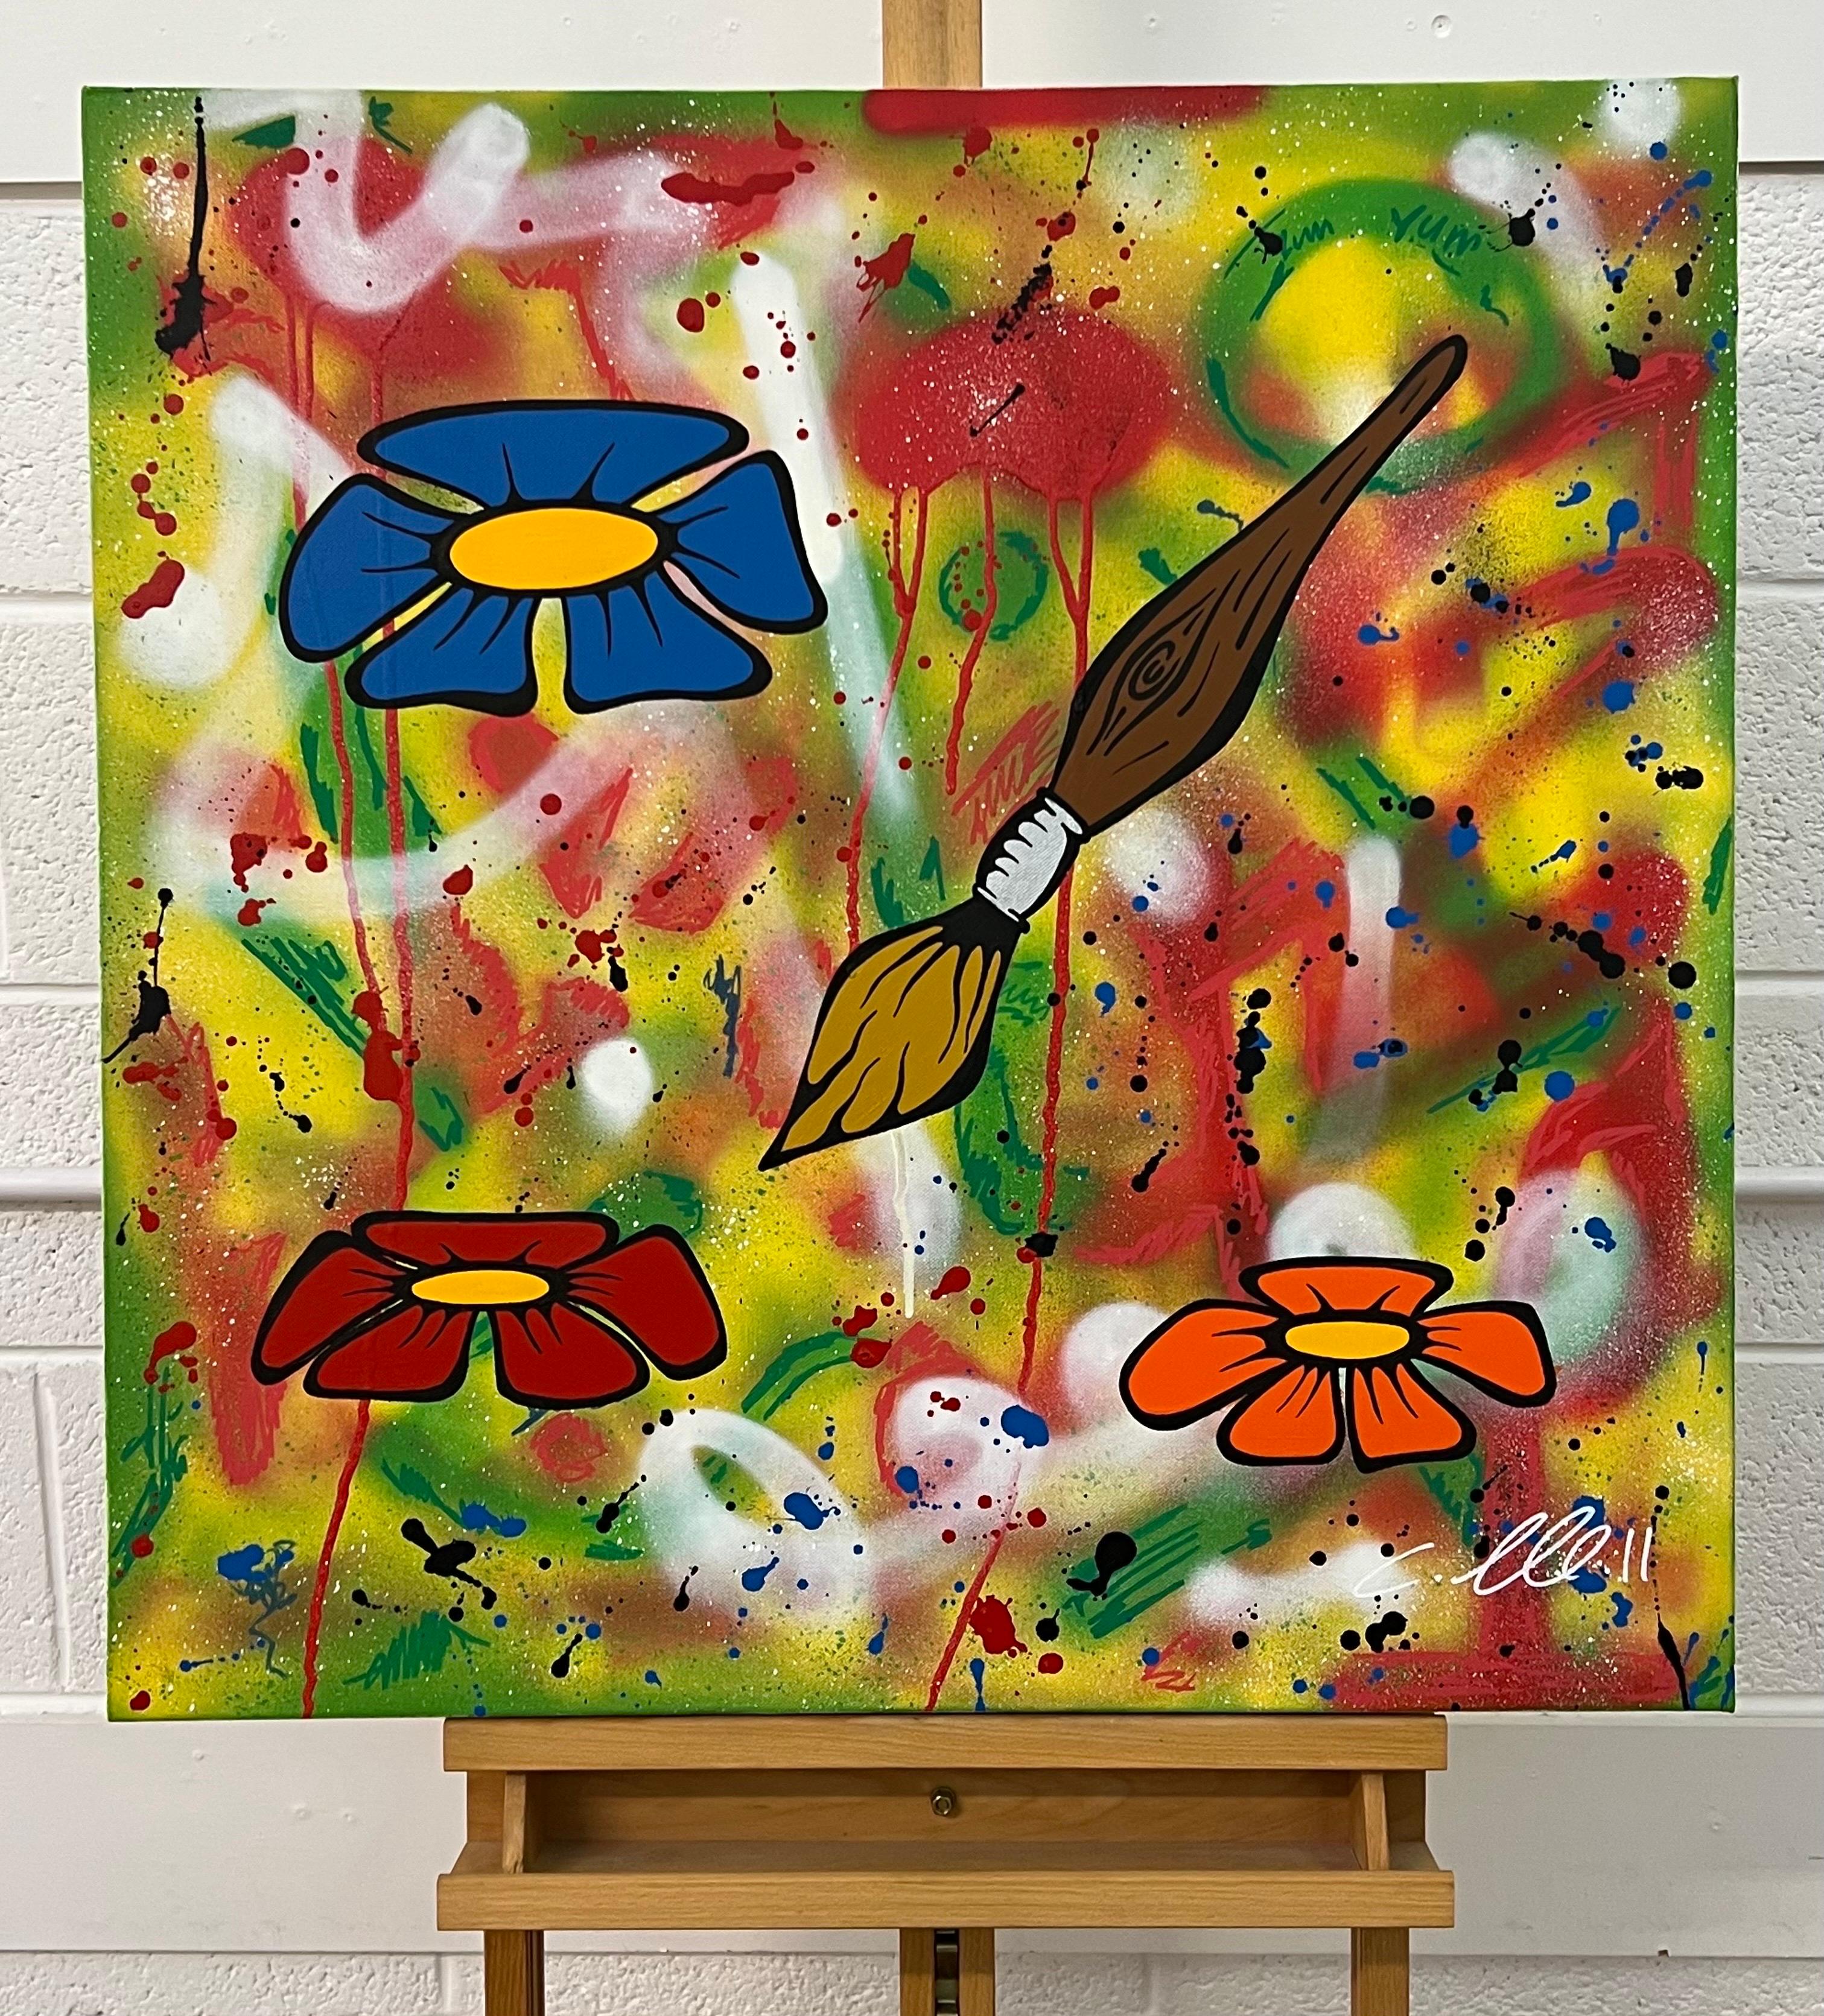 Flowers & Paint Brush Pop Art on Abstract Background by British Graffiti Artist - Painting by Chris Pegg